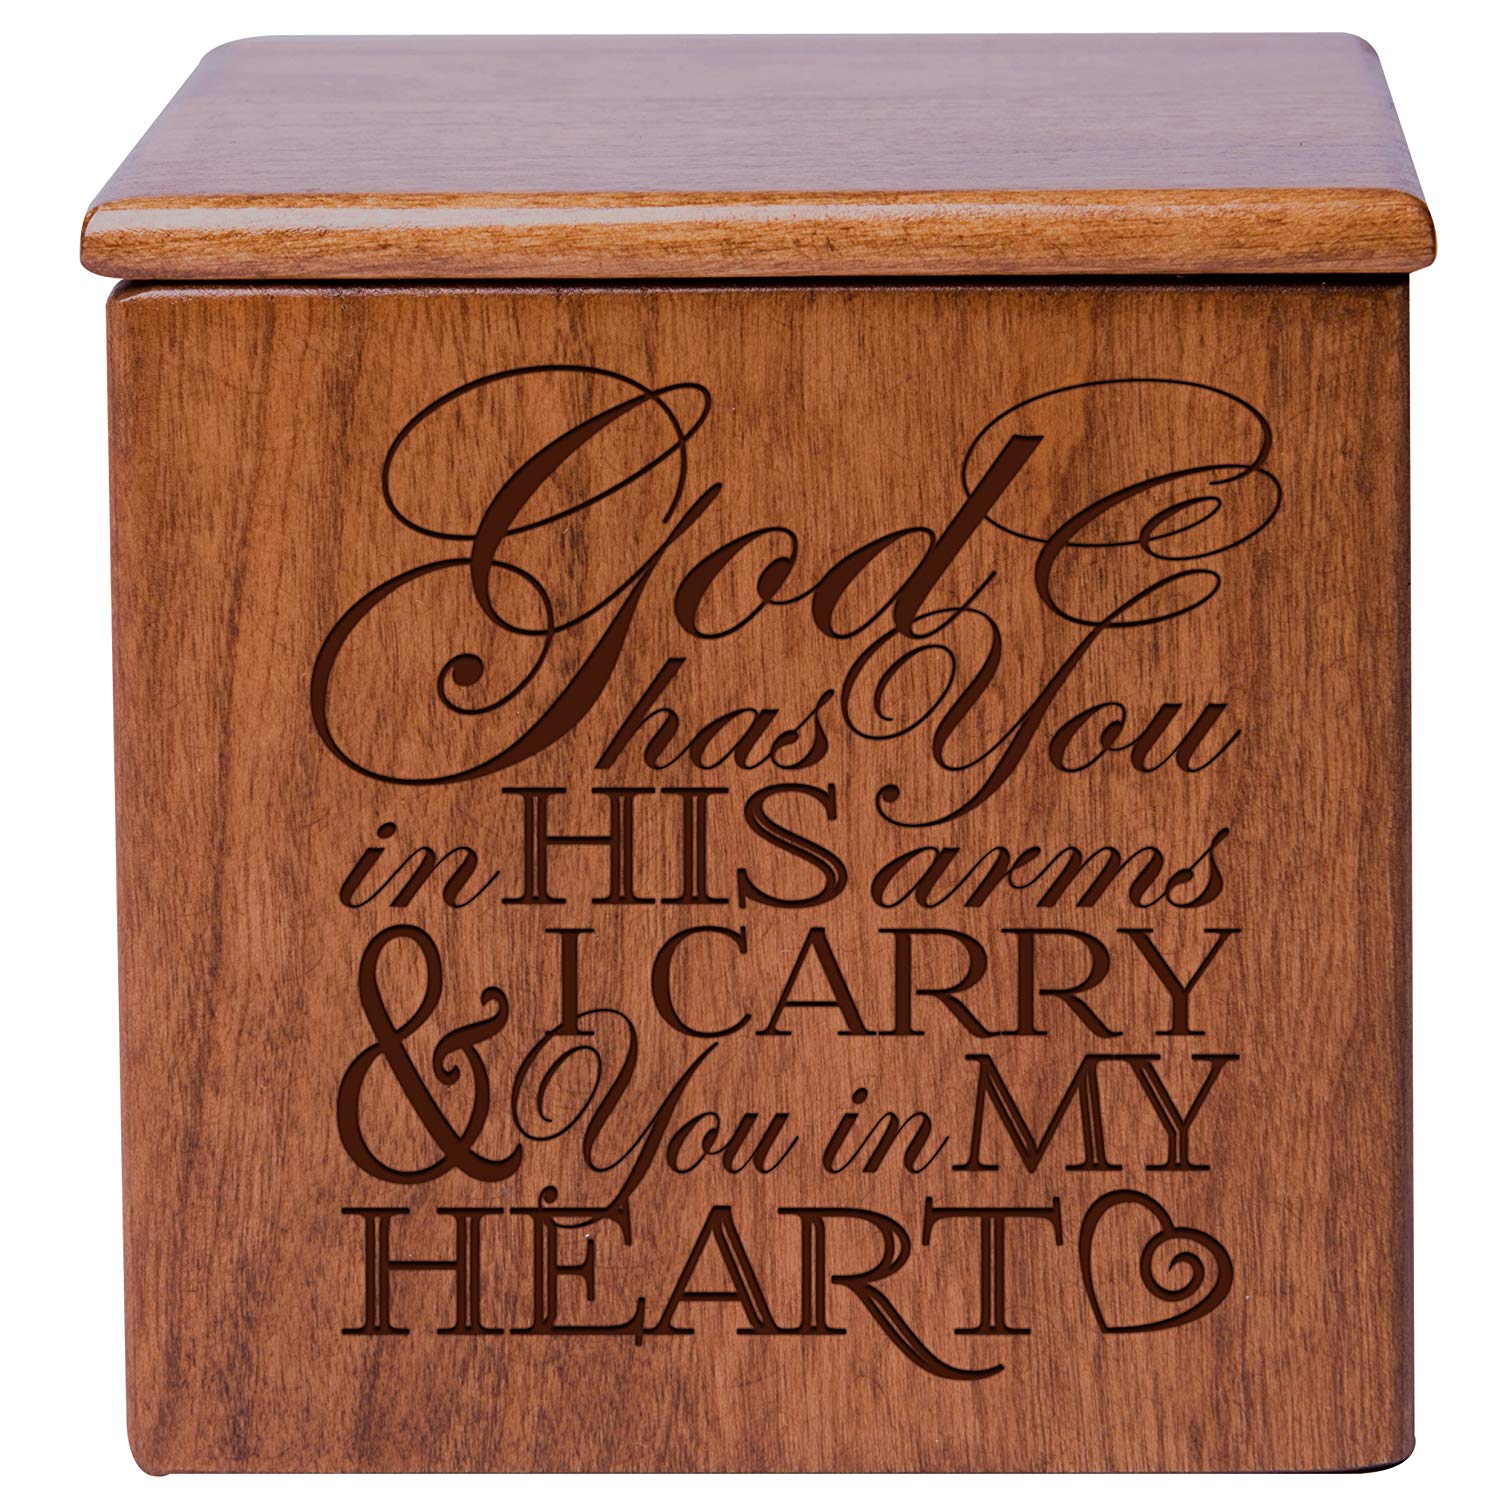 Wooden Cremation Urn for Human Ashes